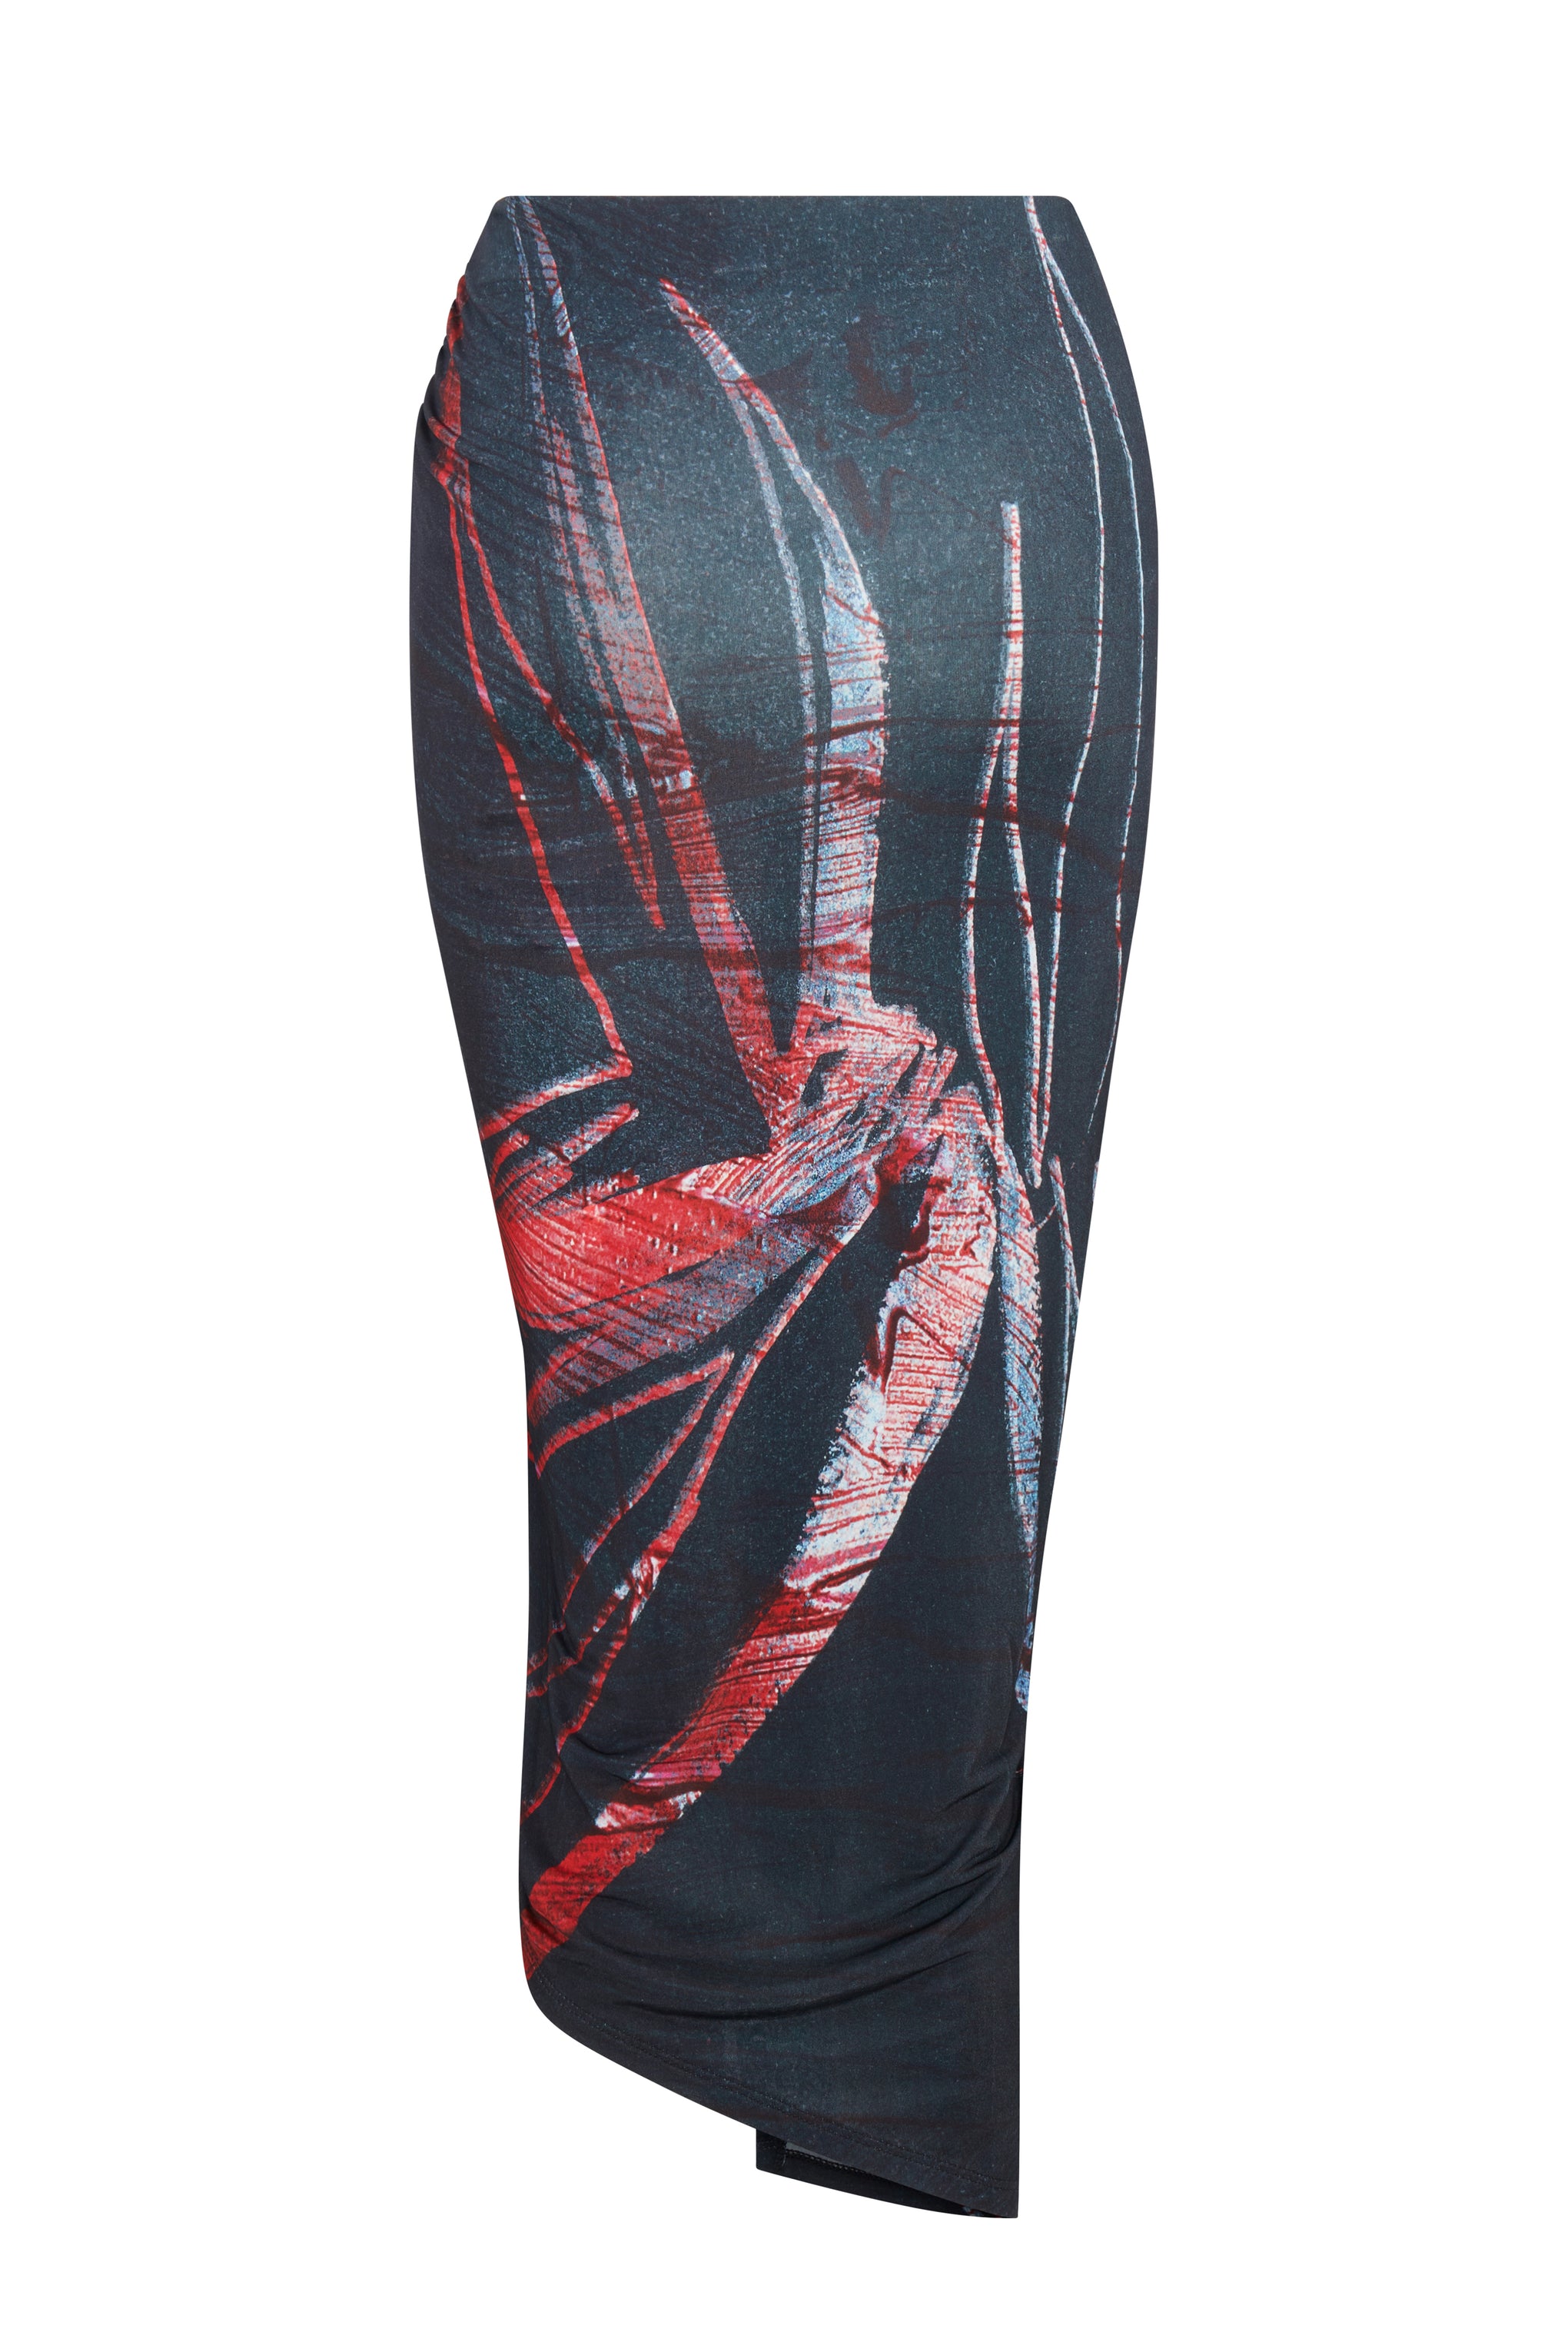 Louisa Ballou Coastline Long Skirt in Red Silver Flower available at TNT The New Trend Australia